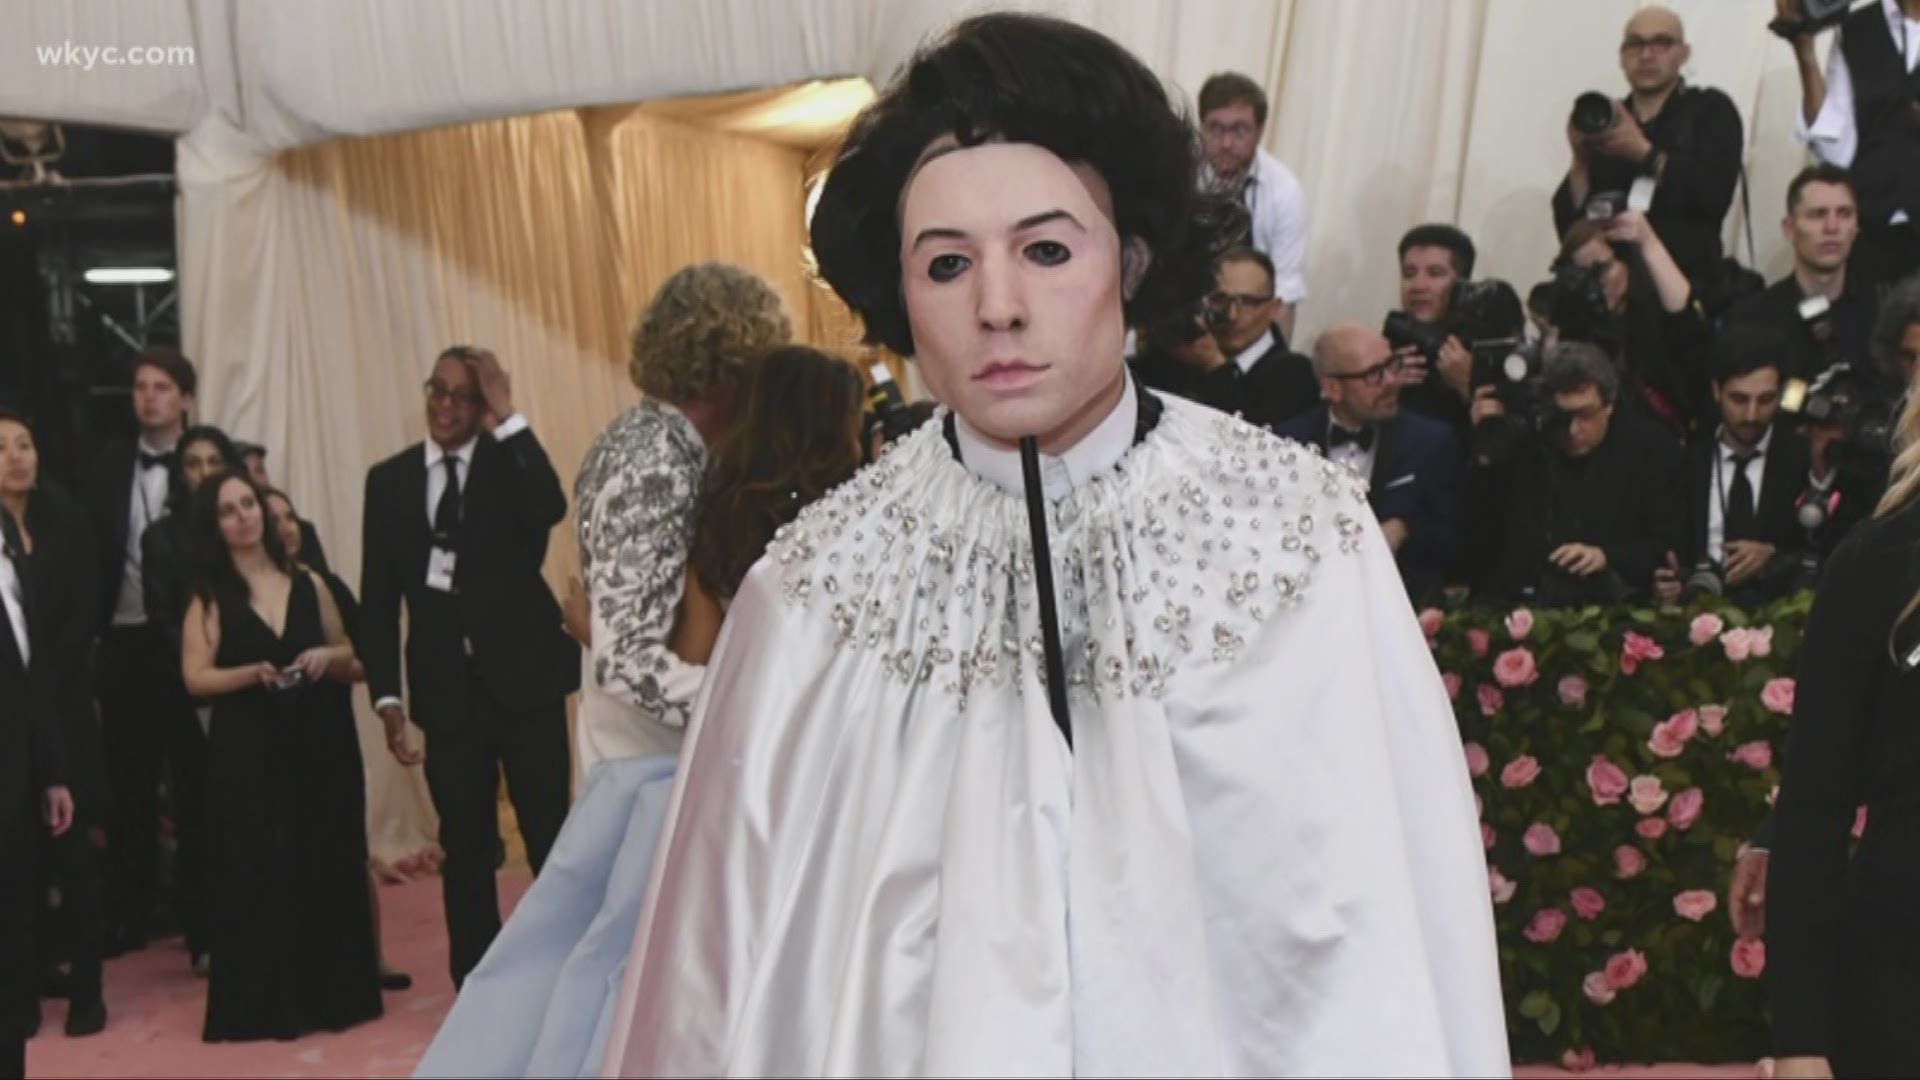 May 7, 2019: Hallie Abrams, the Wardrobe Consultant, weighs in on some of the most unique fashion spotted at the 2019 Met Gala in New York.